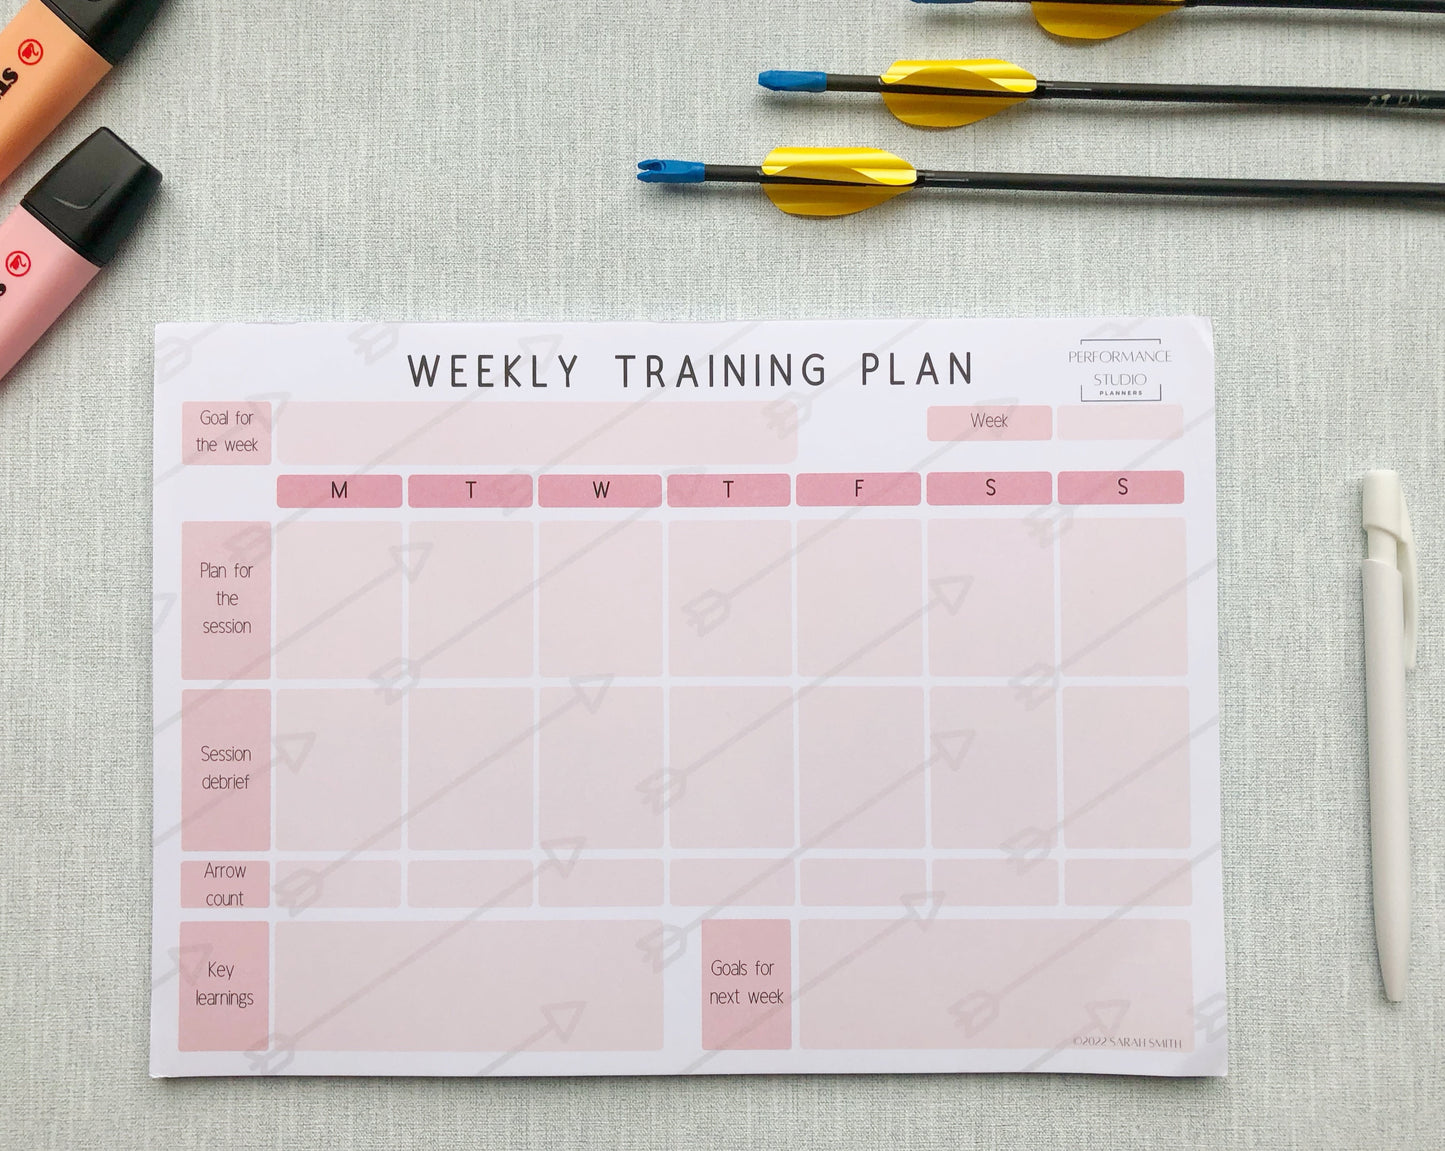 pink themed archery weekly planner. With different sections titled, goal for the week, plan for the session, session debrief, arrow count, key learnings, and goal for next week.